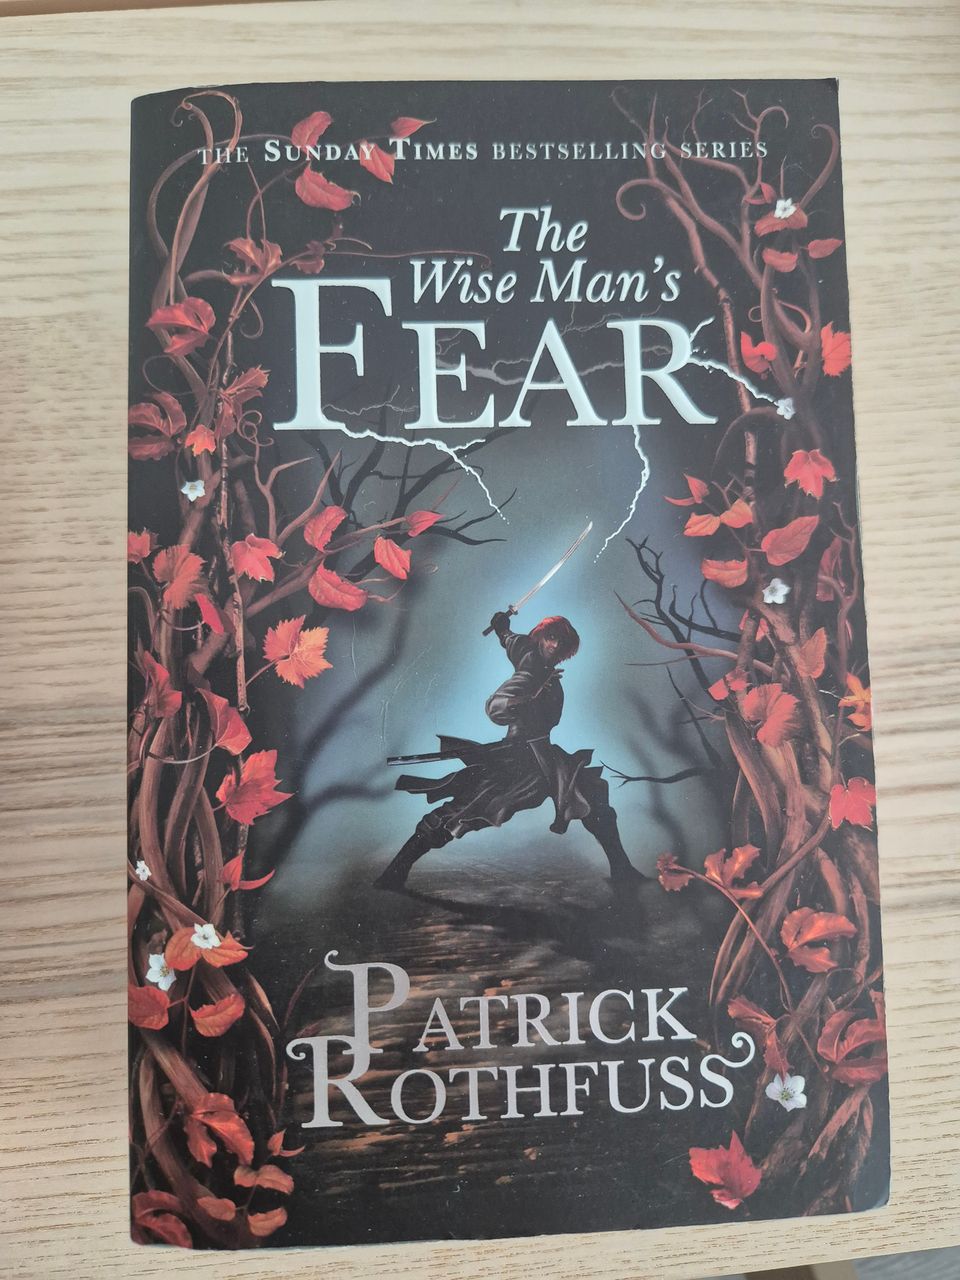 Patrick Rothfuss The Wise Man's Fear